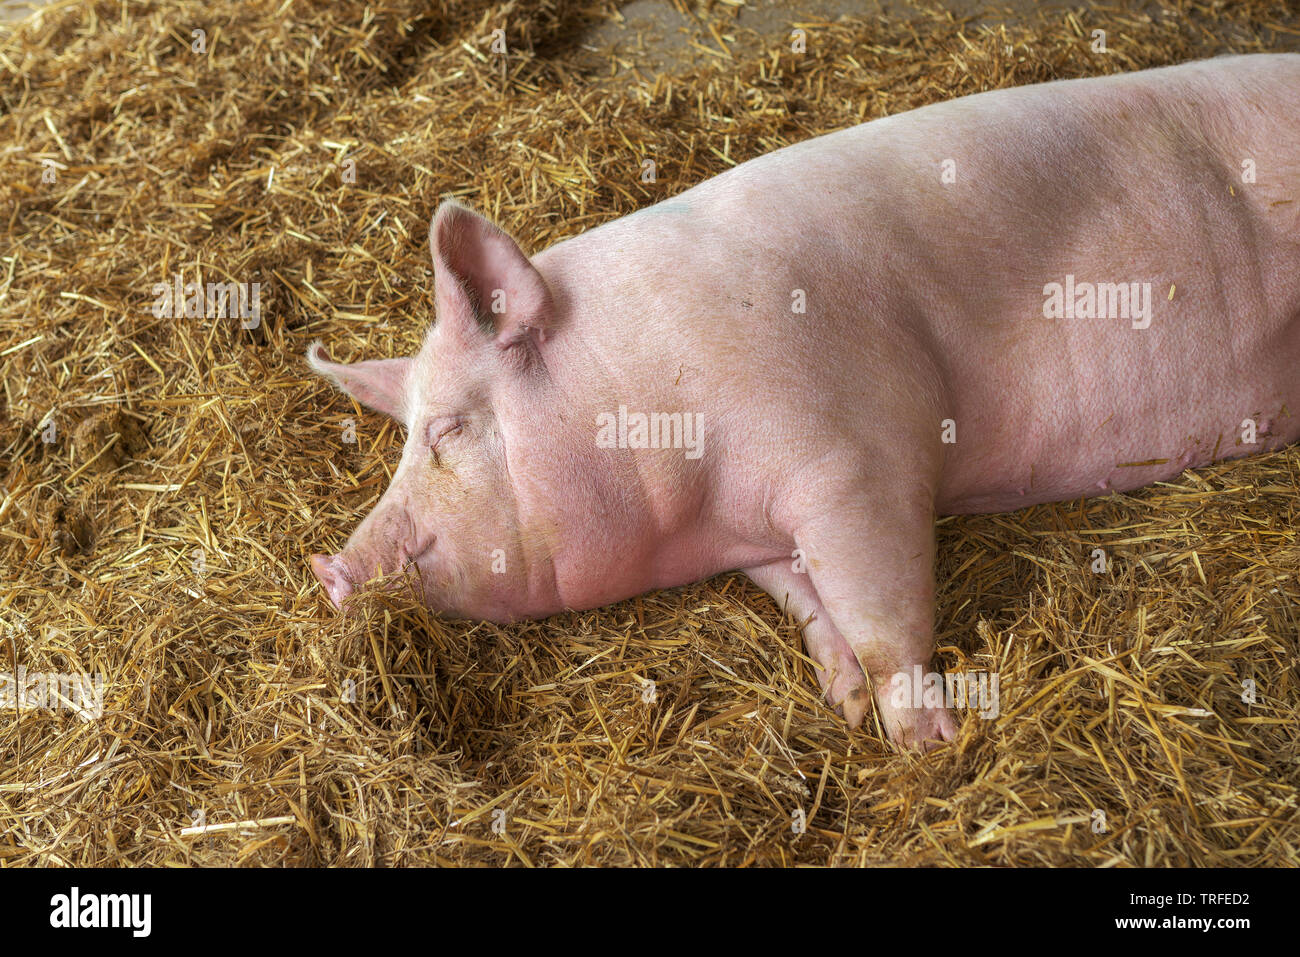 Pig sleeping in pigpen on hay, adult domestic farm animal resting in pigsty Stock Photo